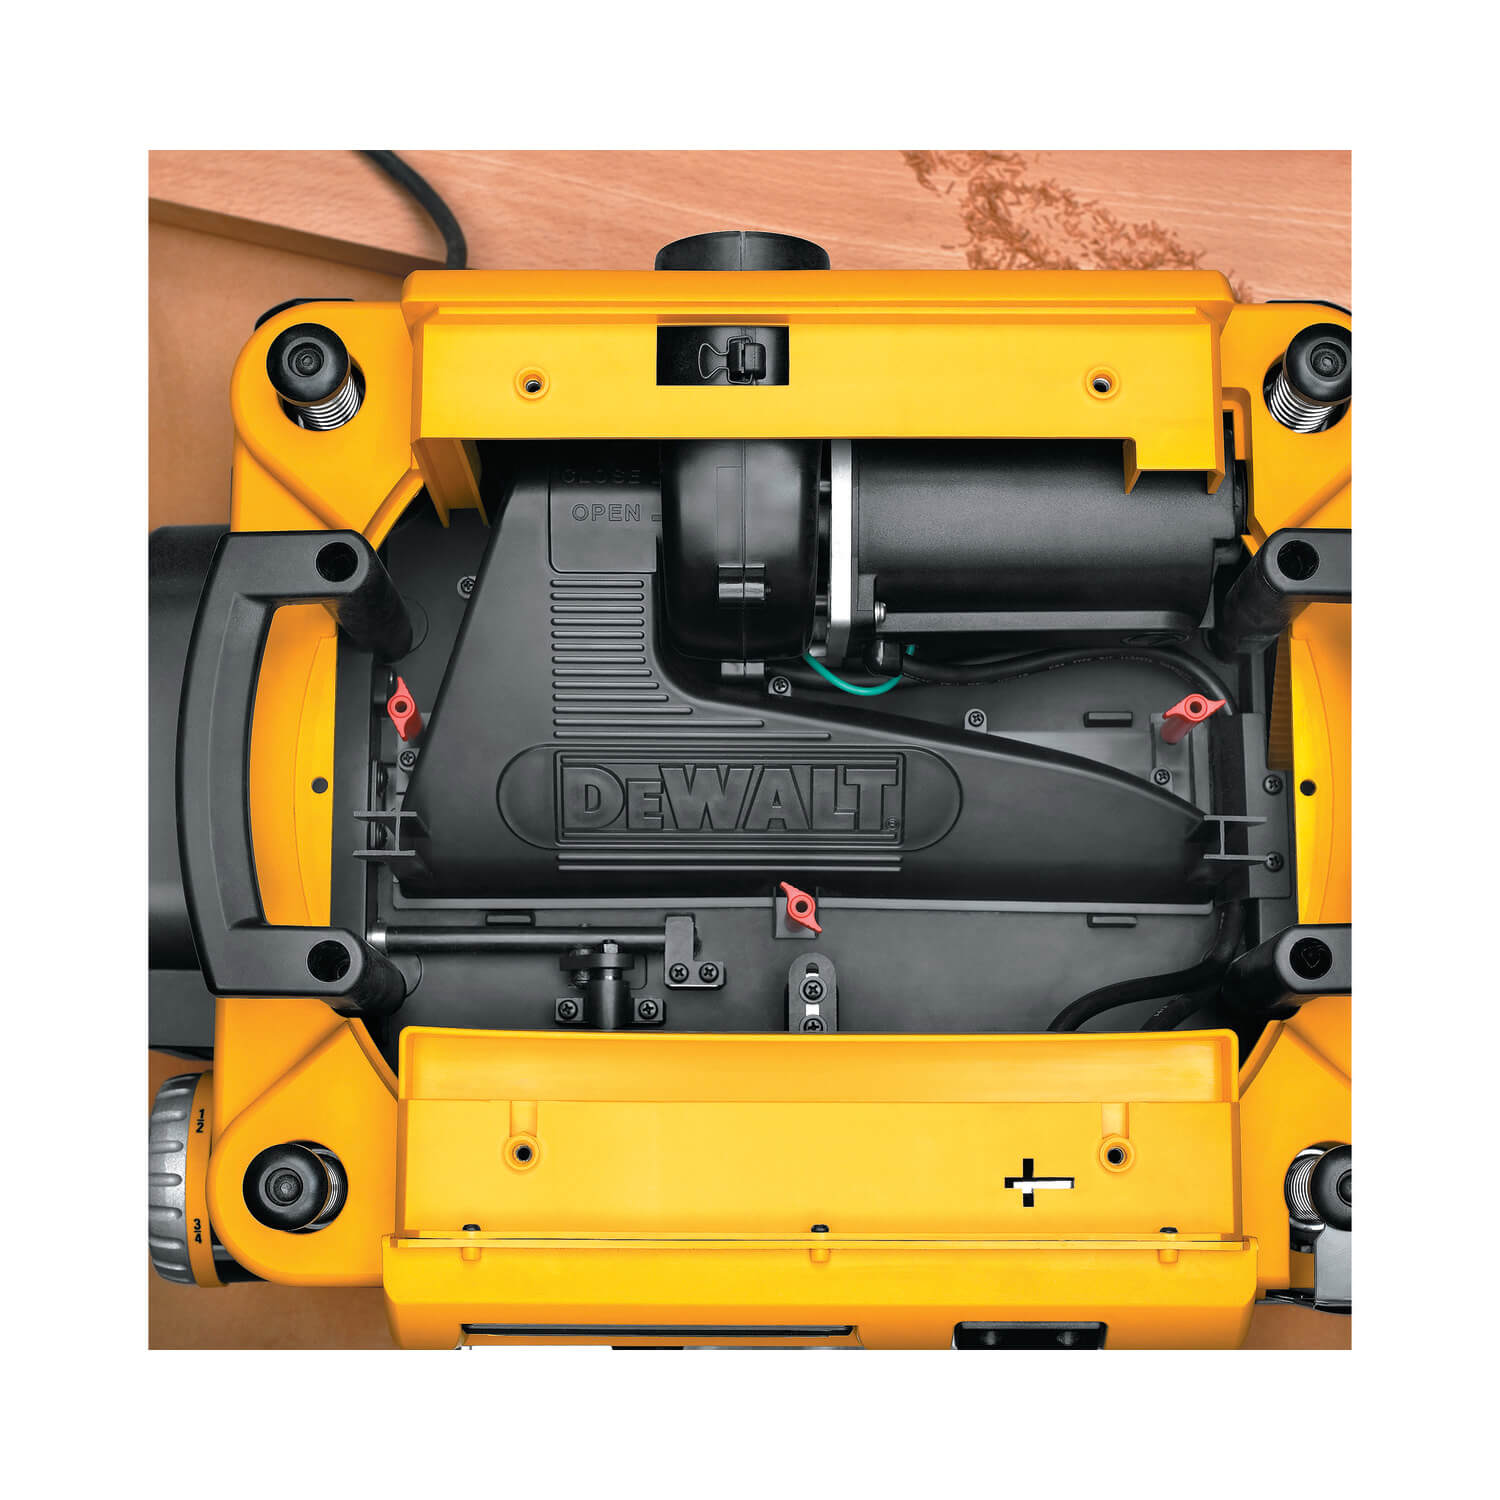 DEWALT DW735 13-Inch, Two Speed Thickness Planer - wise-line-tools